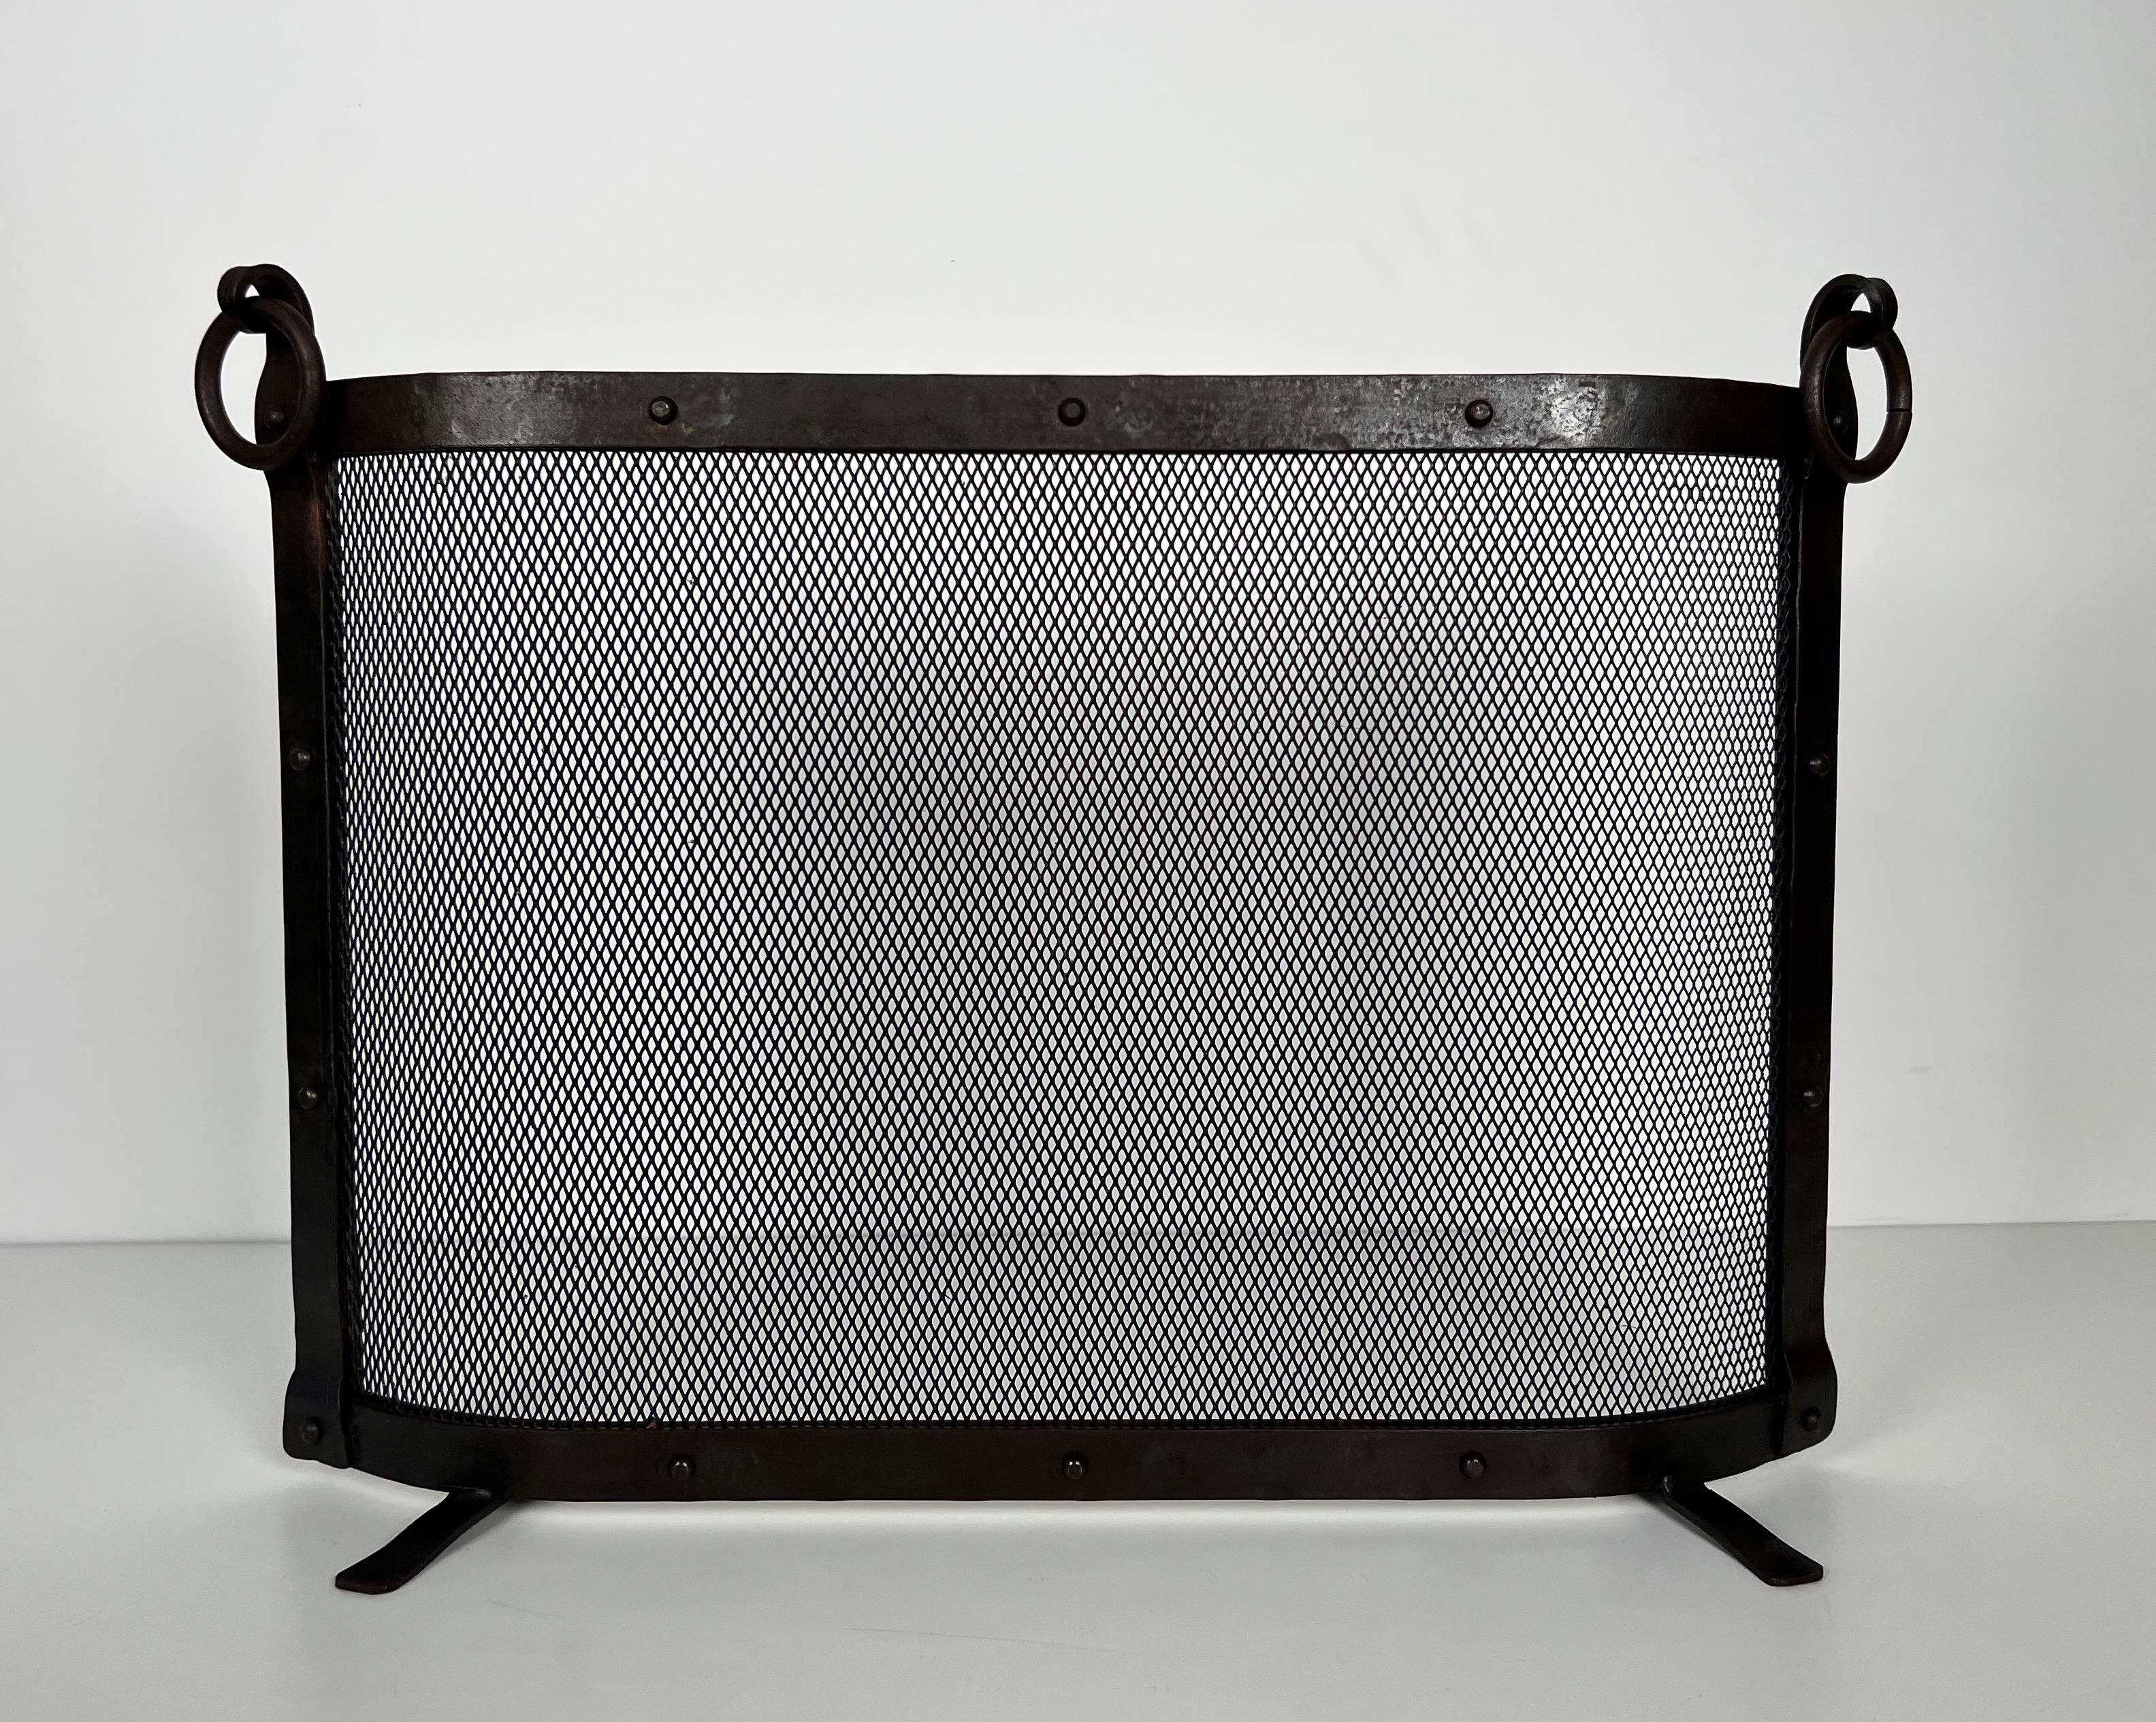 This nice curved fireplace screen is made of a steel grilling surrounded by a thick riveted wrought iron frame with rings. This is a French modernist work in the style of Jacques Adnet. Circa 1940